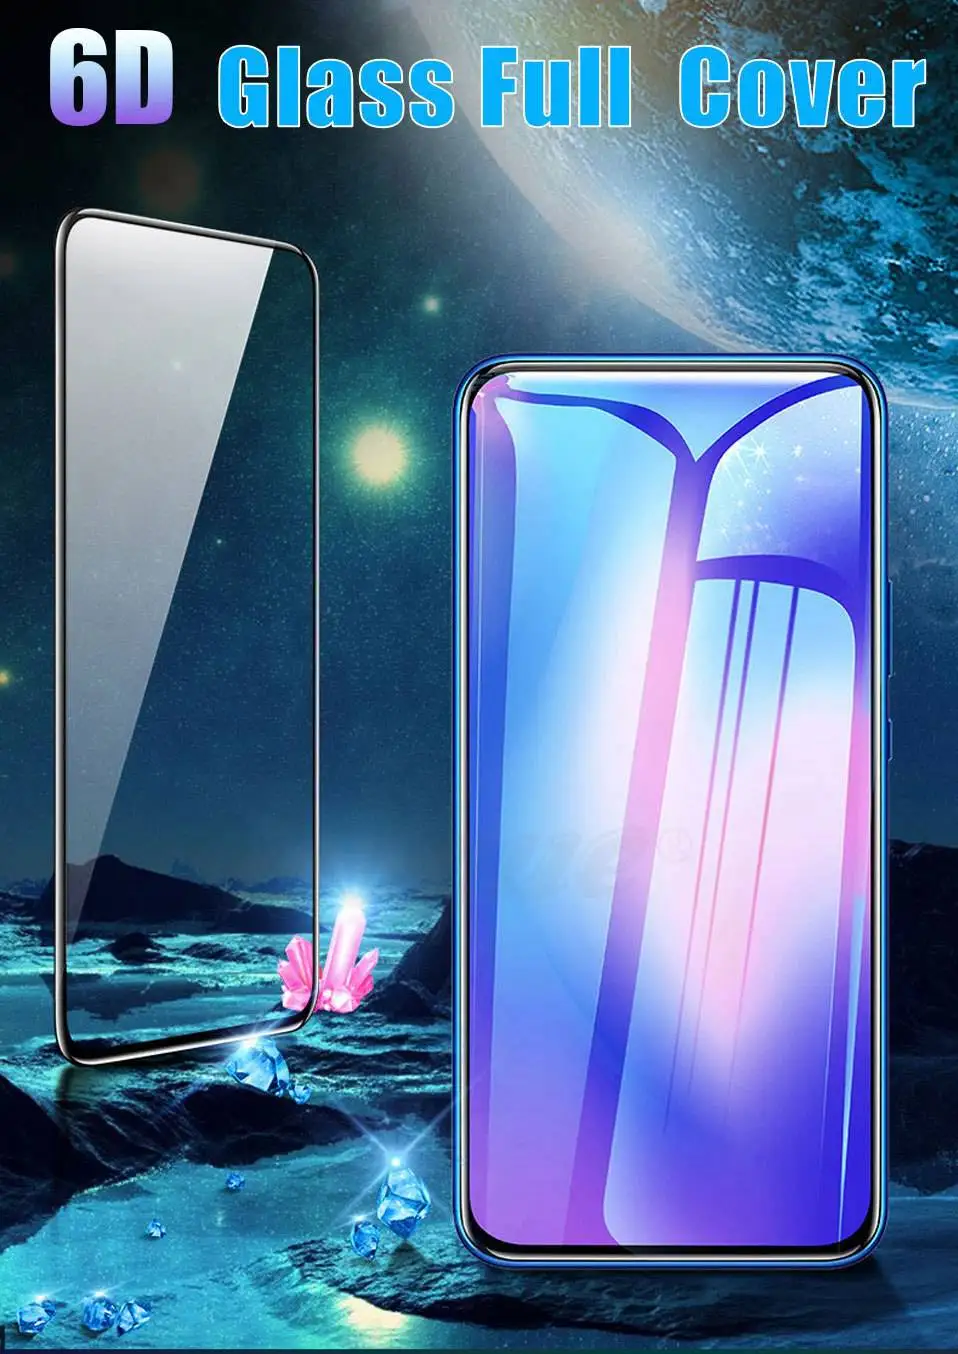 6D Tempered Glass for OPPO F9 F11 Pro F7 K1 K3 Screen Protector Glass for OPPO Reno Z R19 R17 Realme X 3 2 Pro A1k C2 A7 AX7 A9x (1)